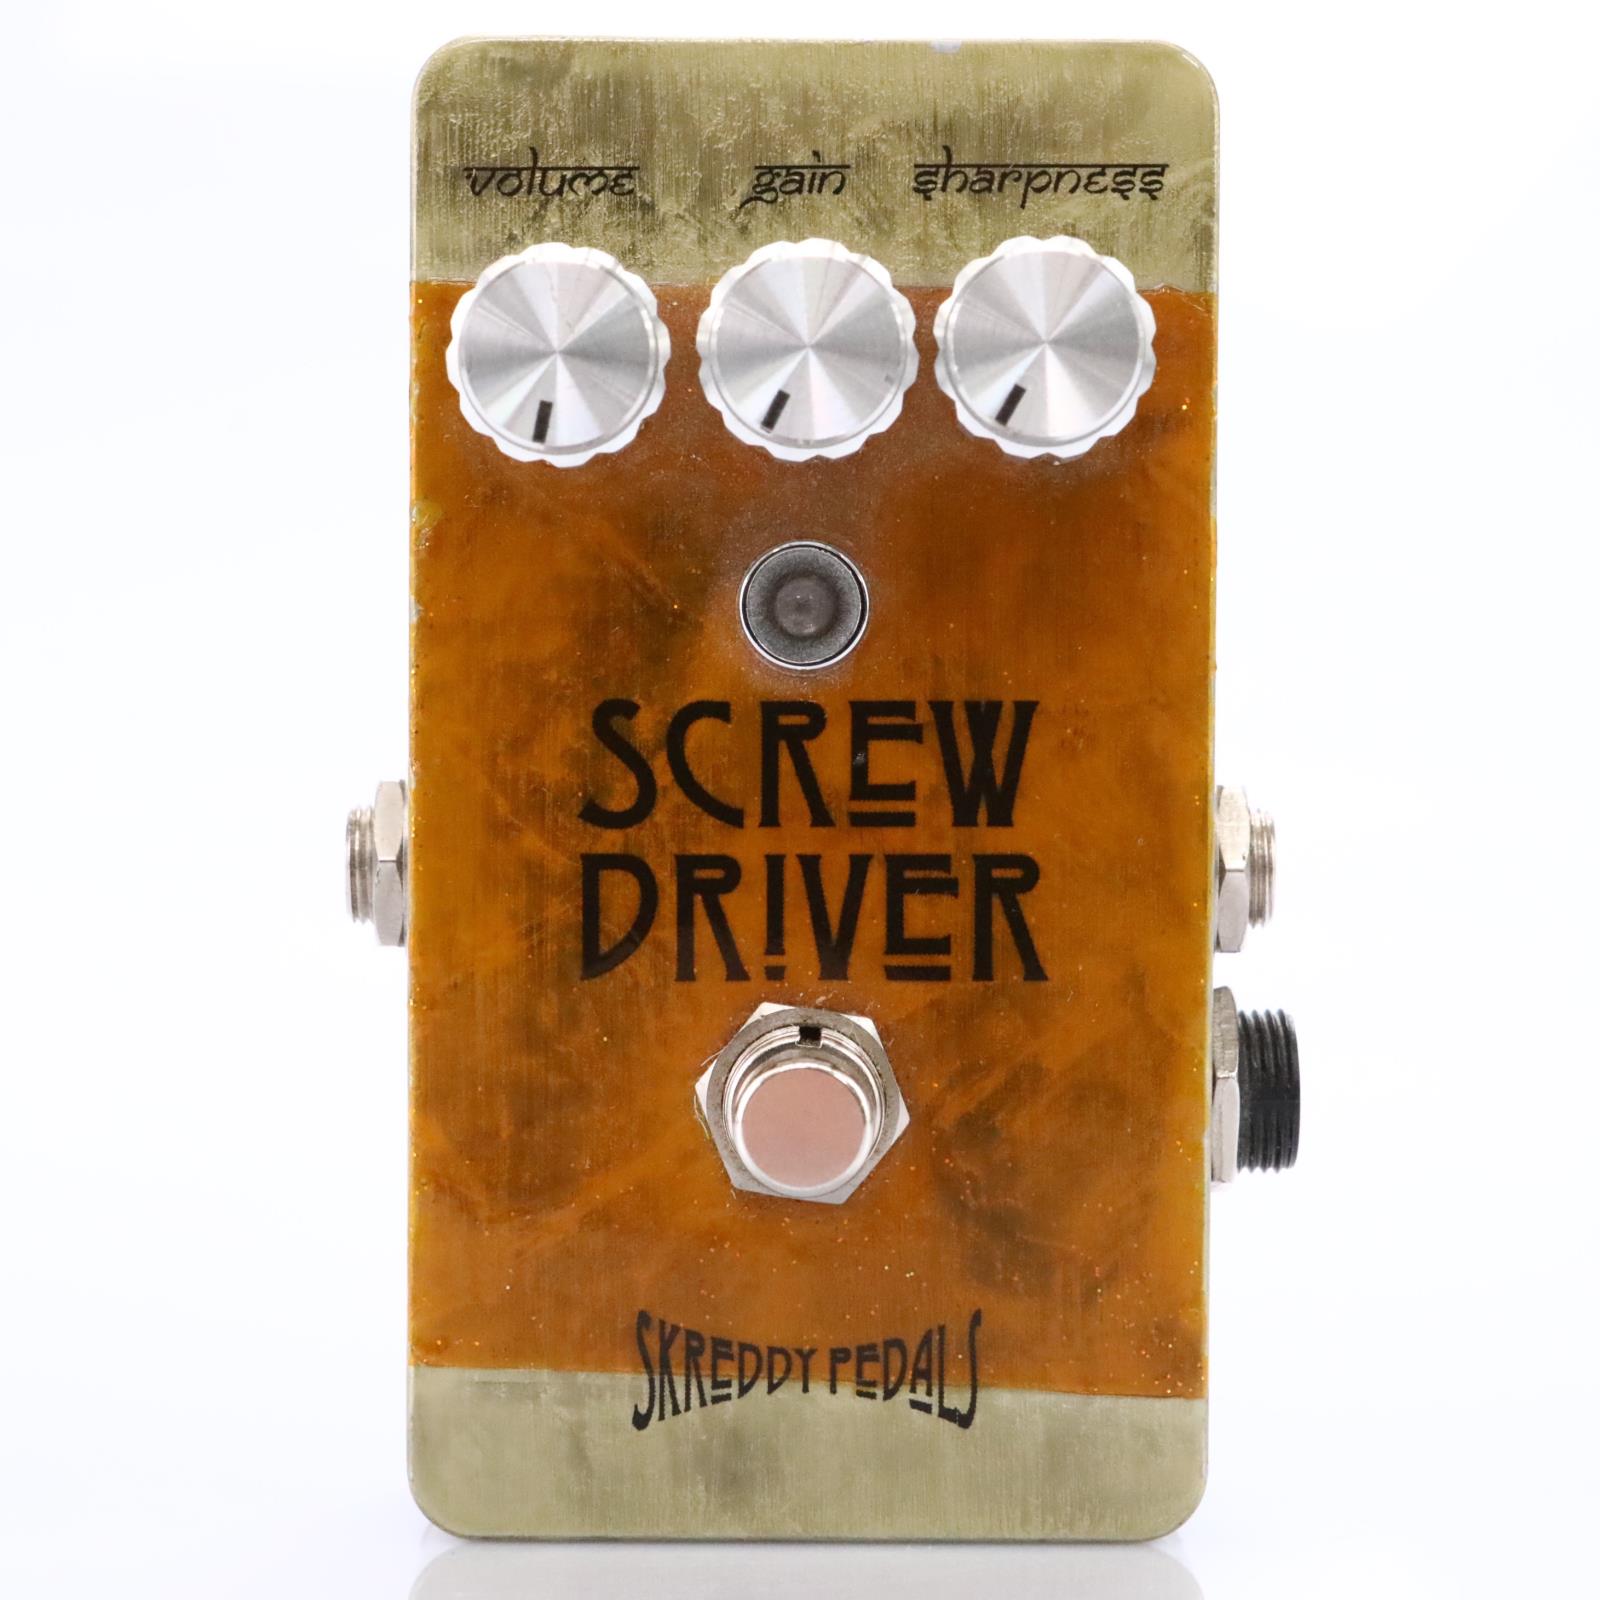 Skreddy Pedals Screw Driver Overdrive Guitar Effects Pedal #50742